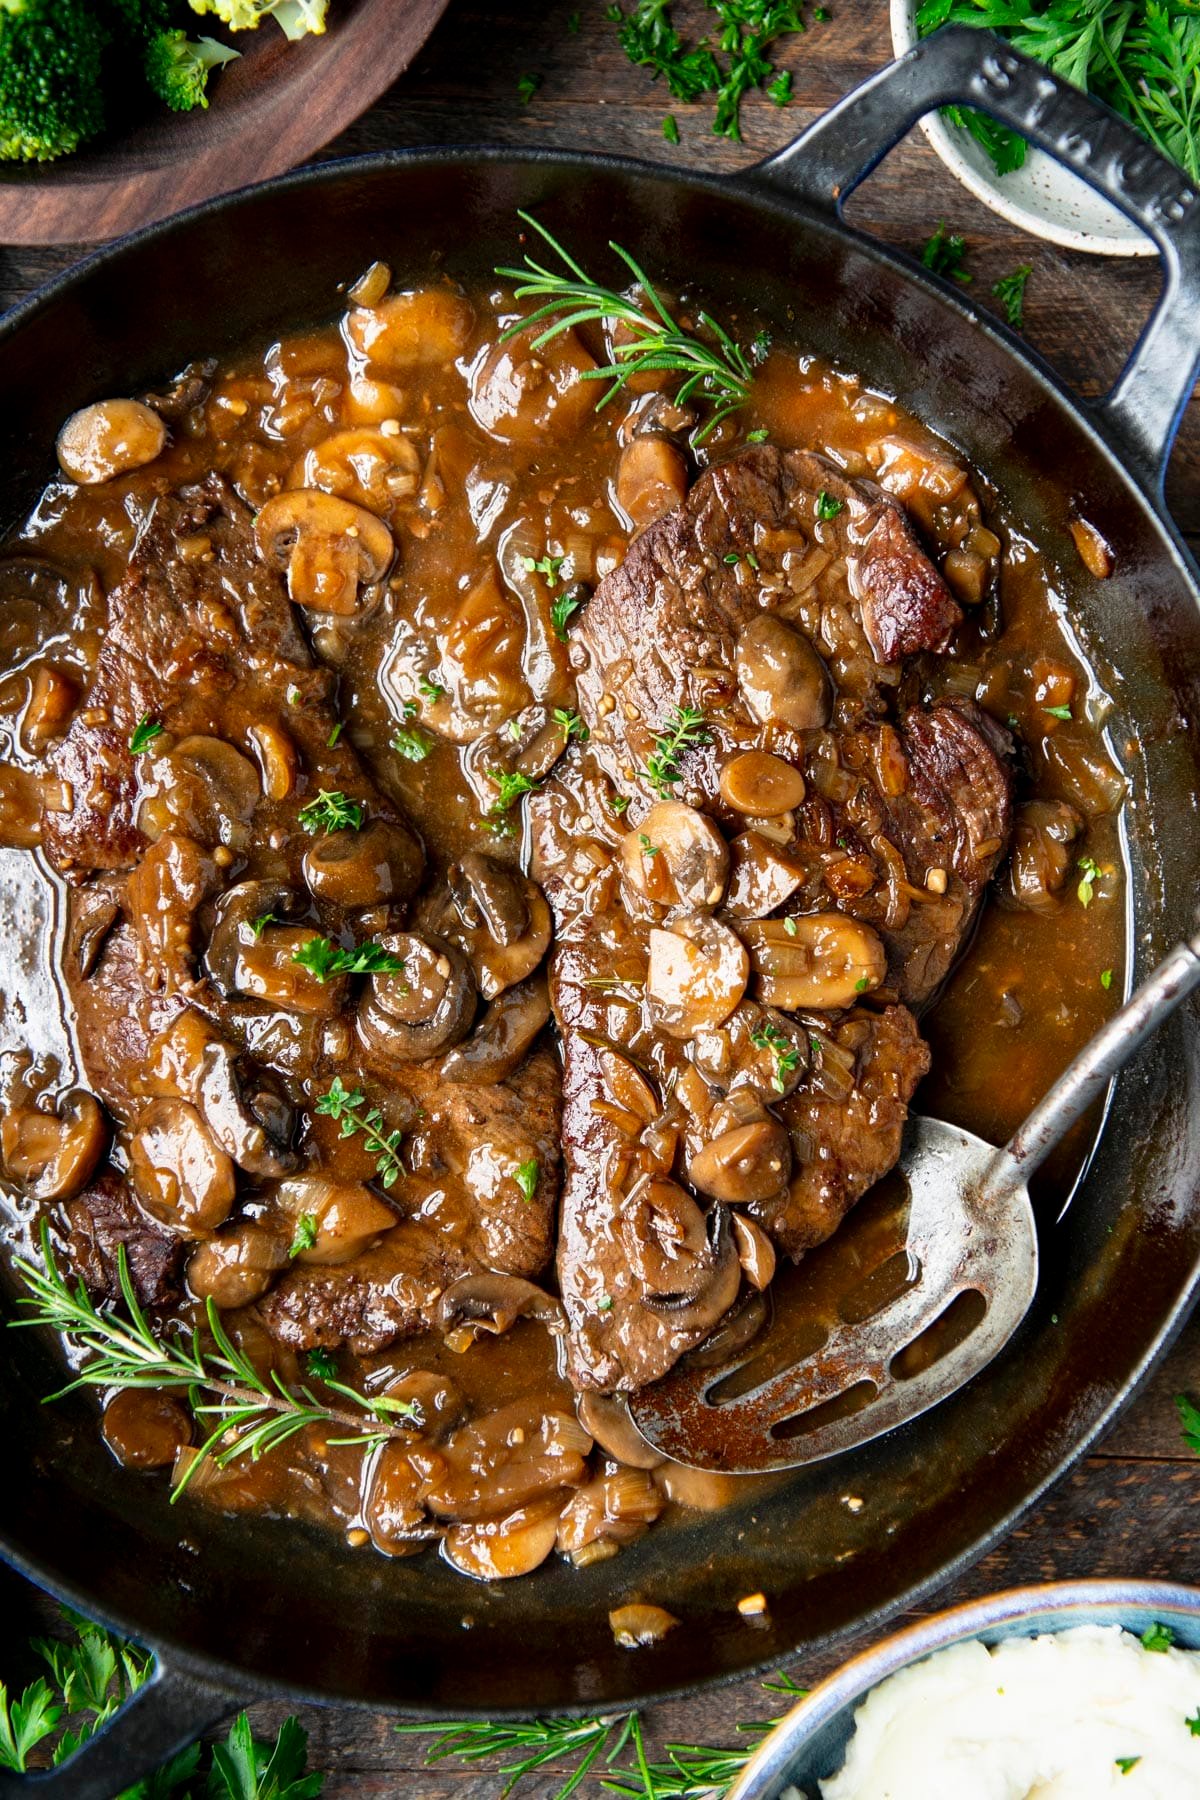 Overhead shot of round steak with mushroom and onion gravy in a cast iron skillet.